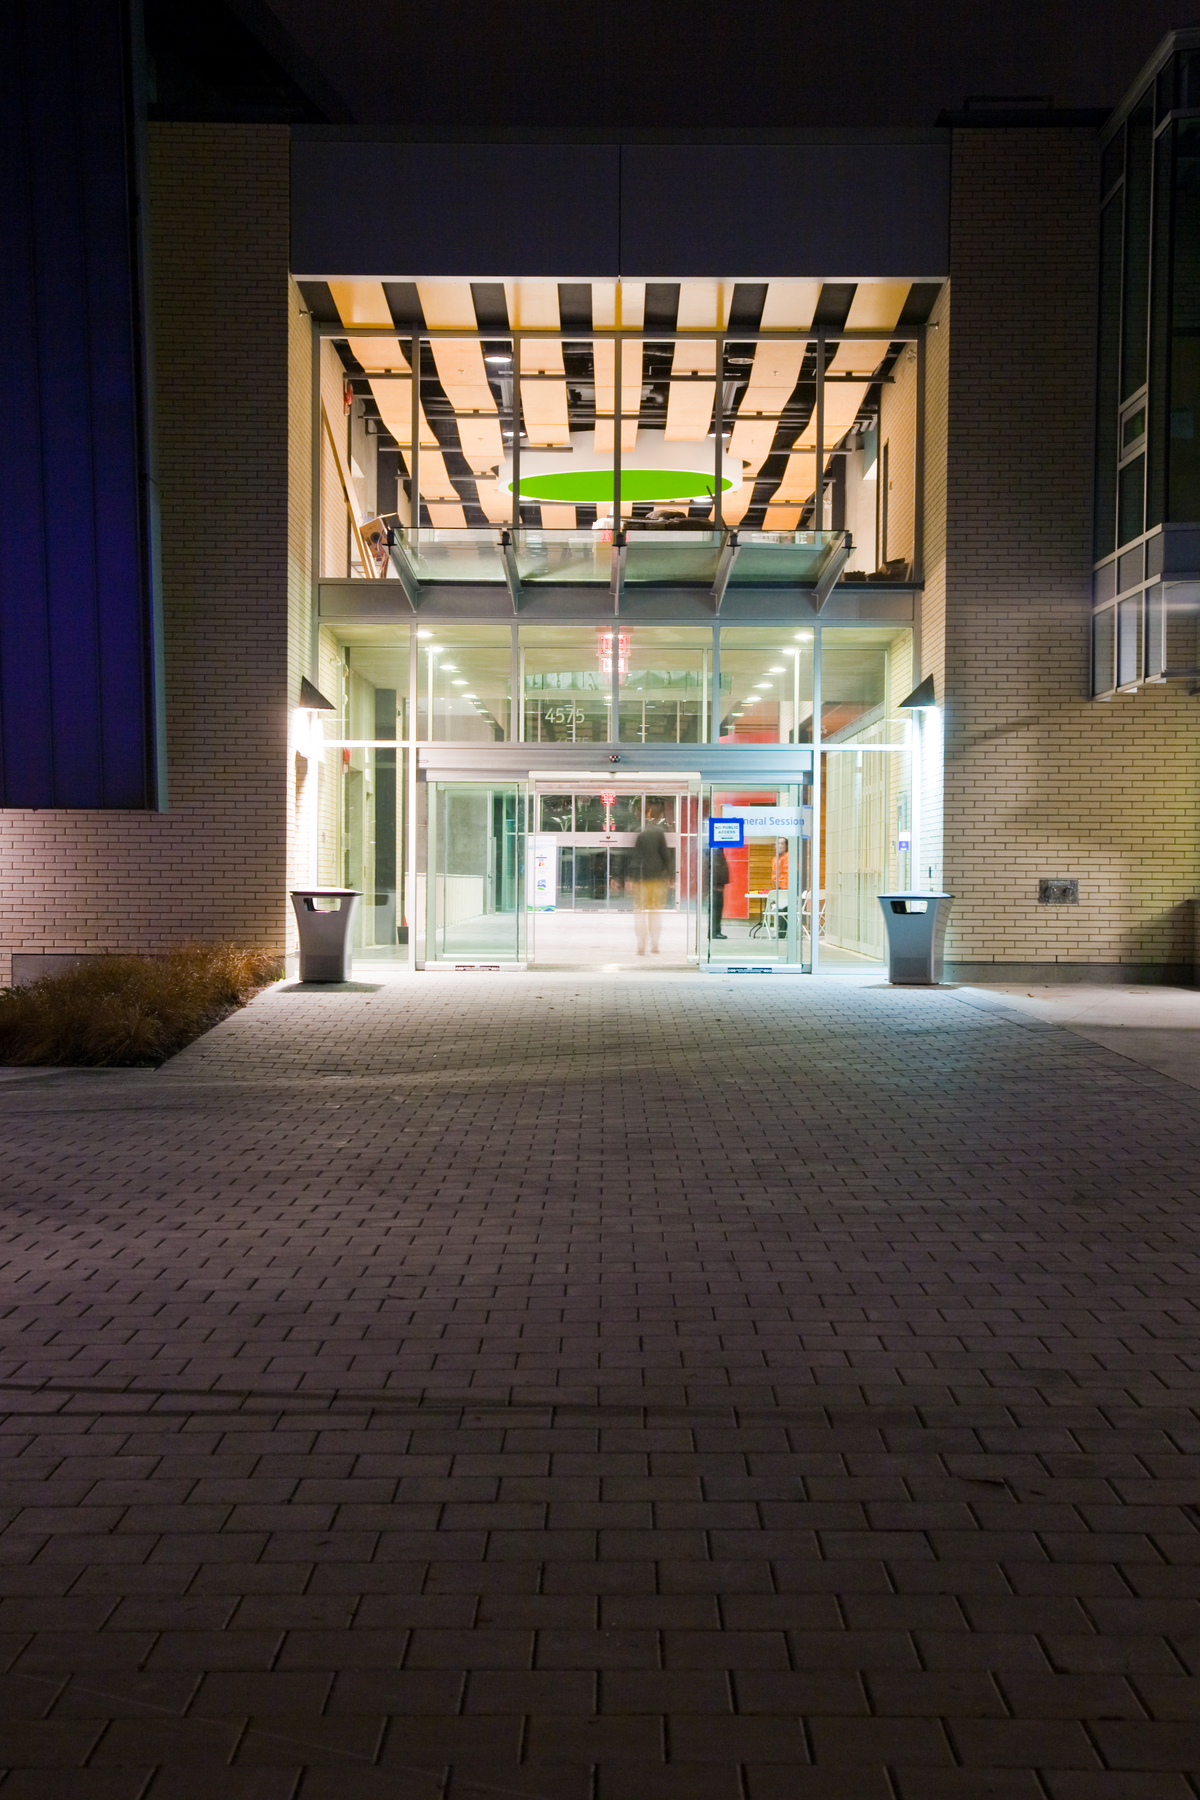 Exterior nighttime image of low rise Hillcrest Centre main entrance showing large glass windows, exterior glass awning, and interior decorate undulating ceiling 'waves' of wood